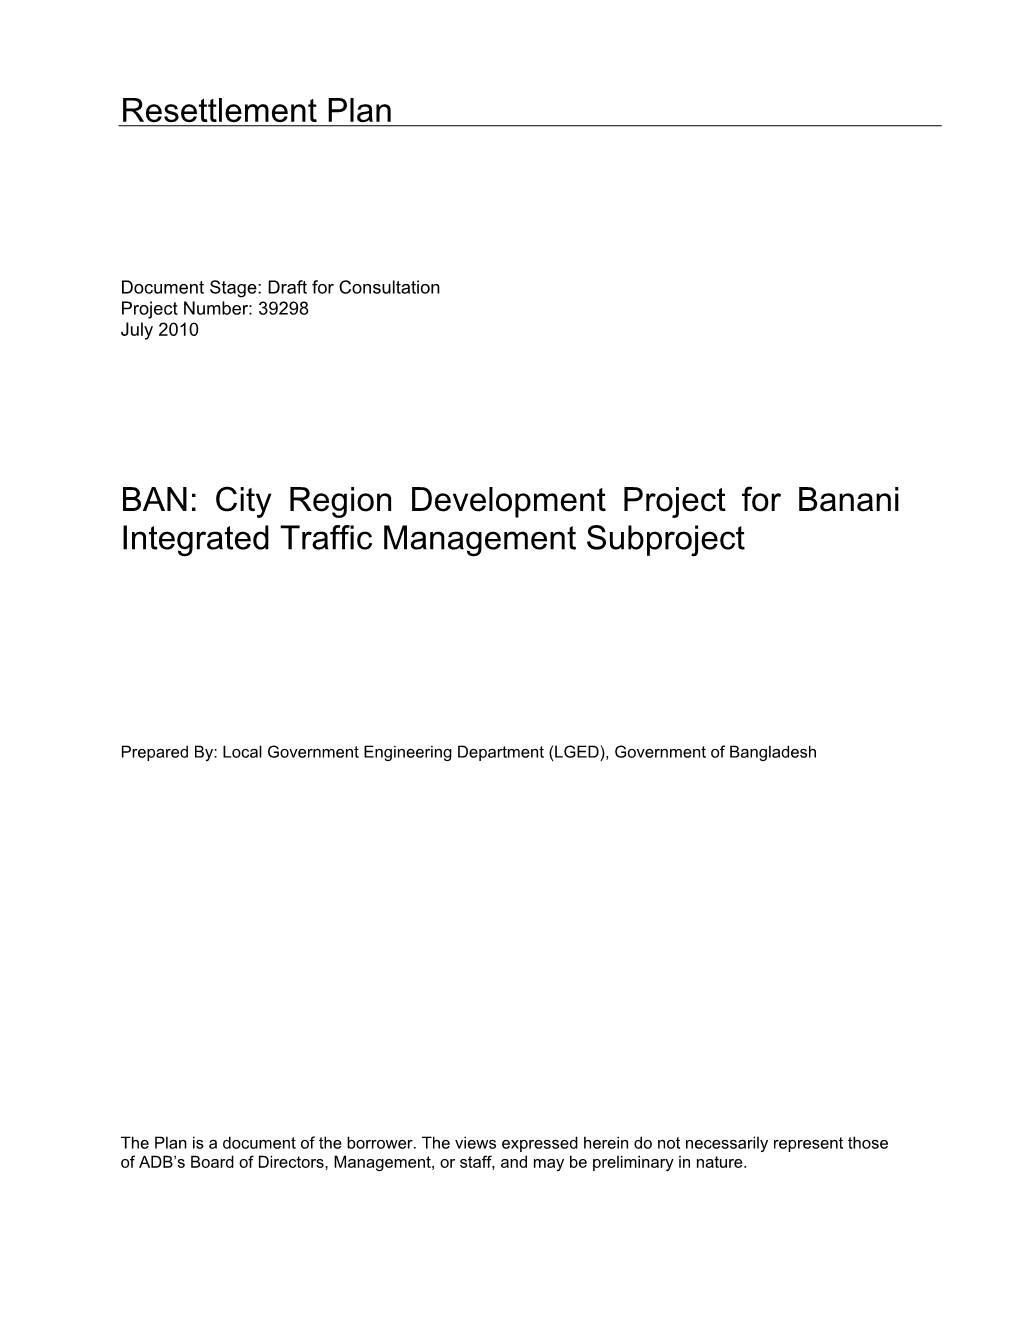 City Region Development Project for Banani Integrated Traffic Management Subproject